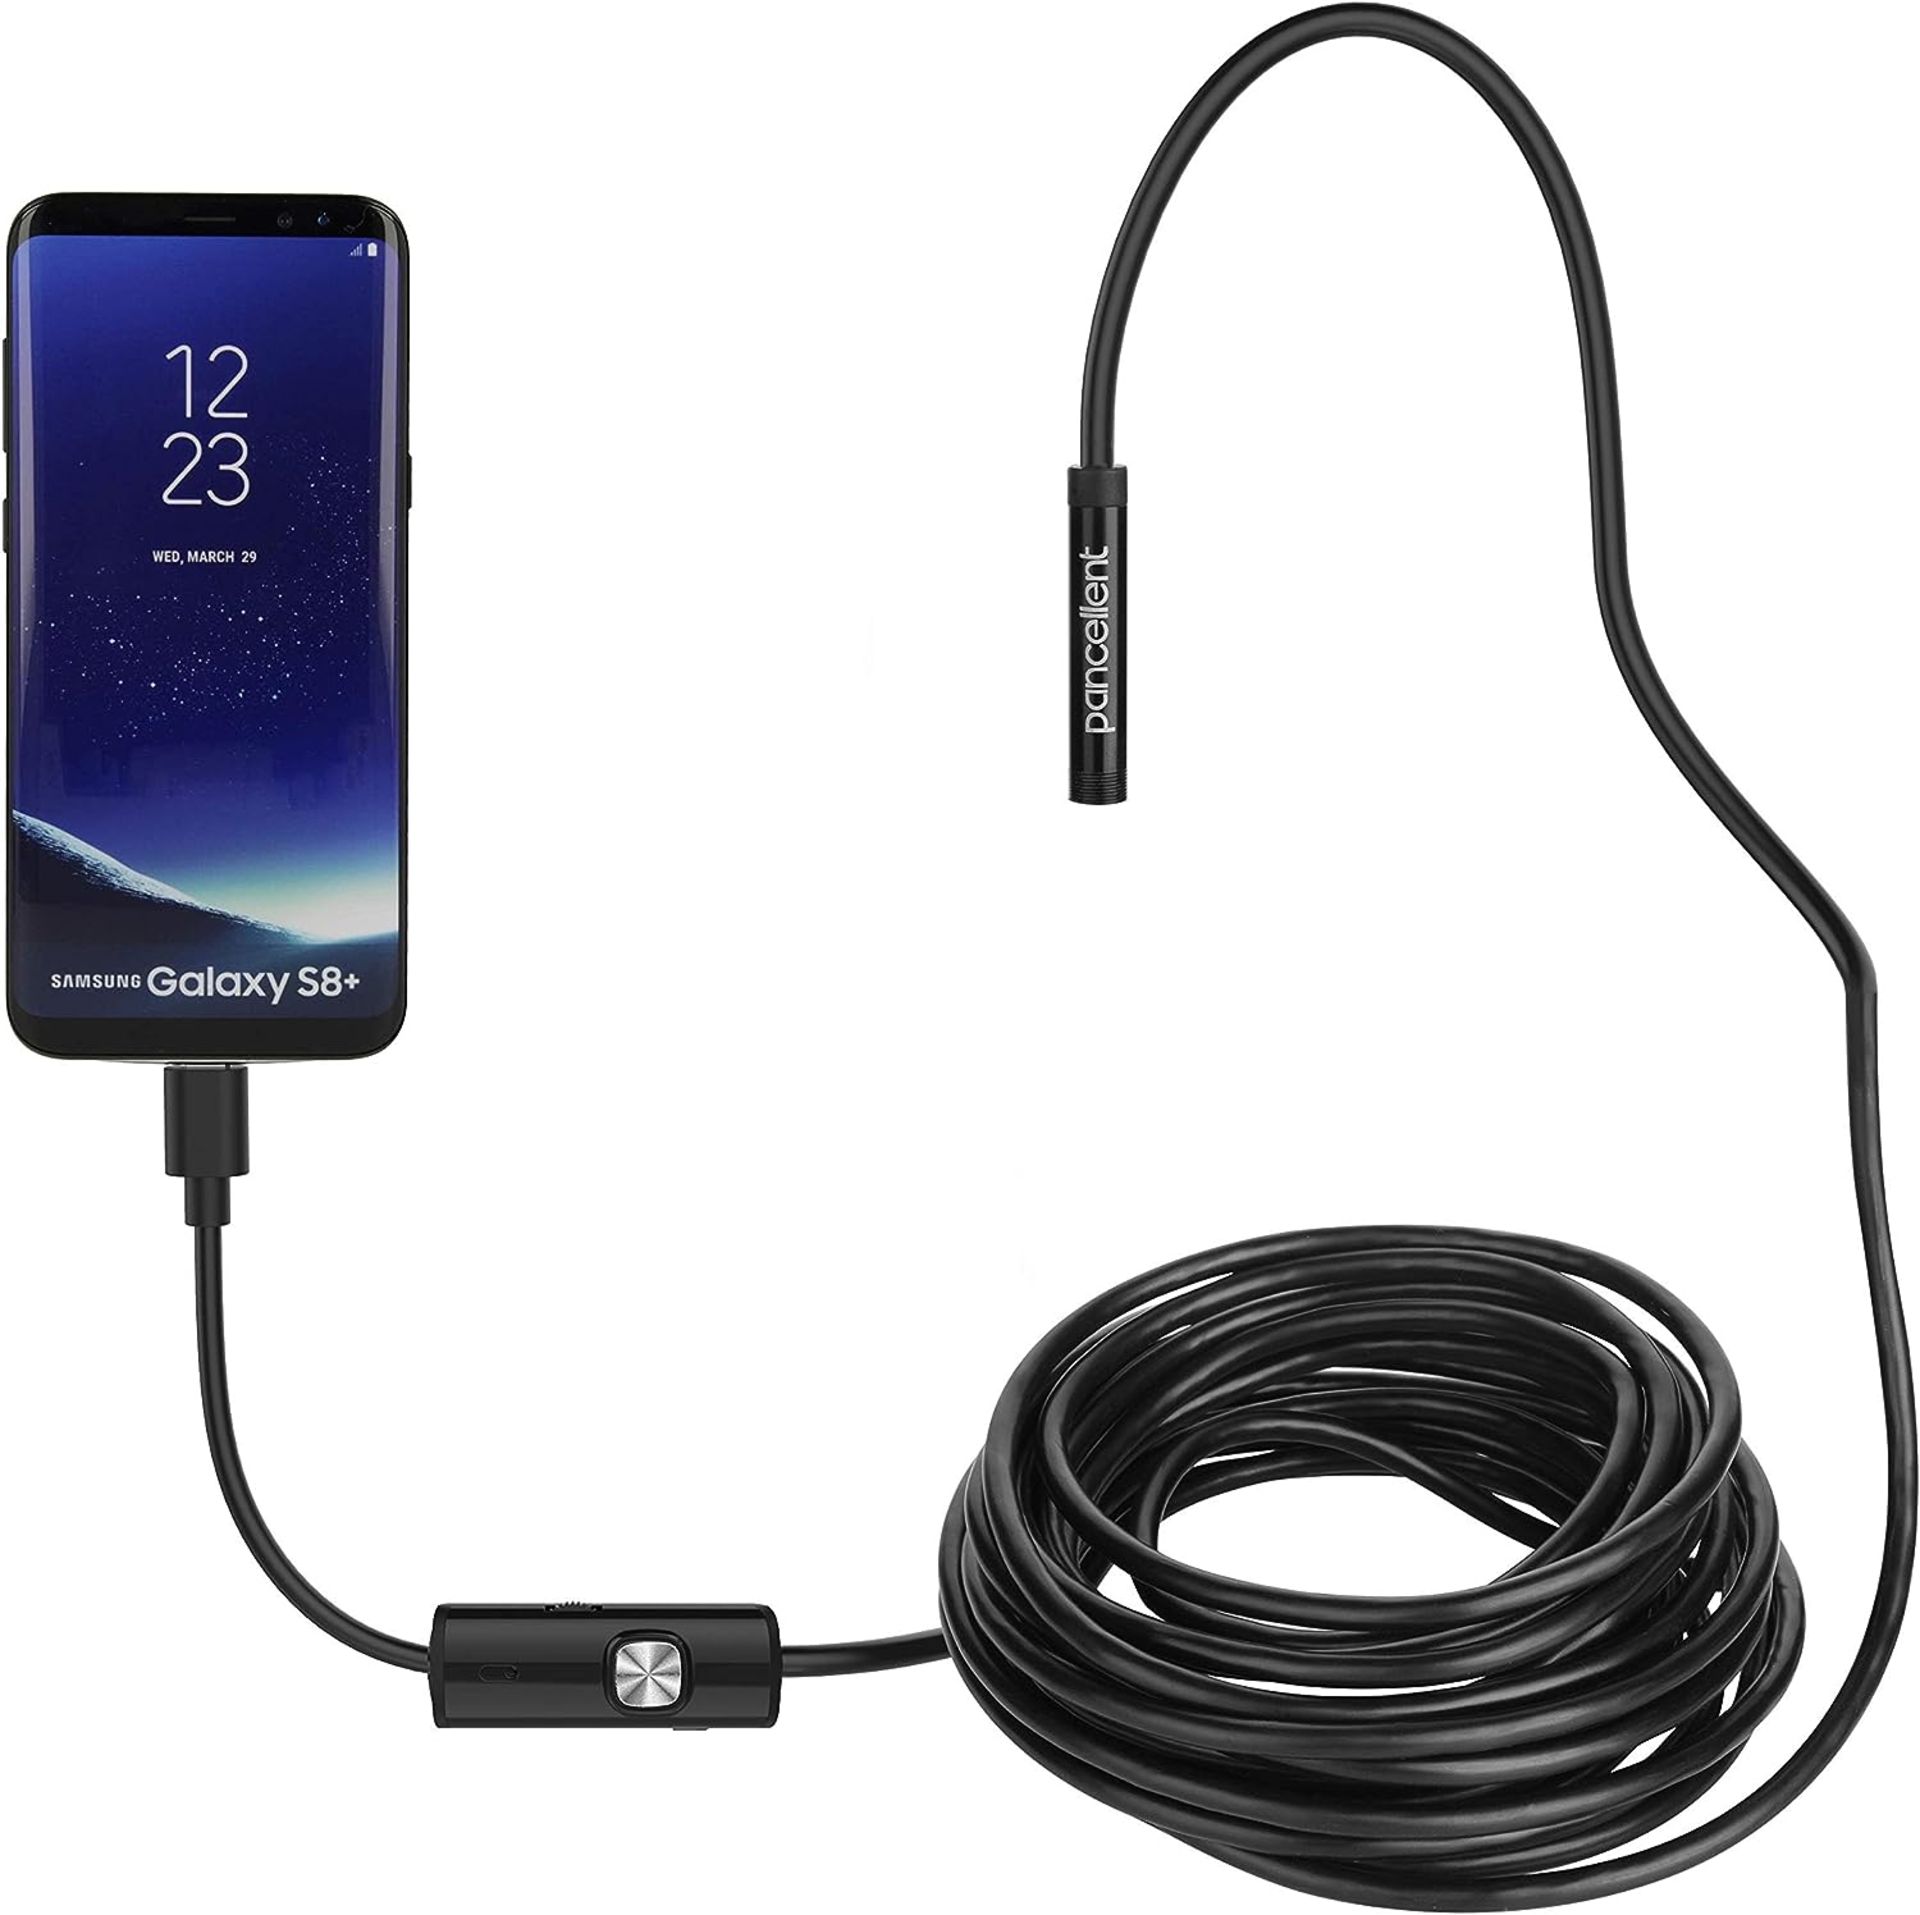 Usb Android Endoscope Pancellent 2.0 Megapixels CMOS HD 2 in 1 Waterproof Borescope Inspection